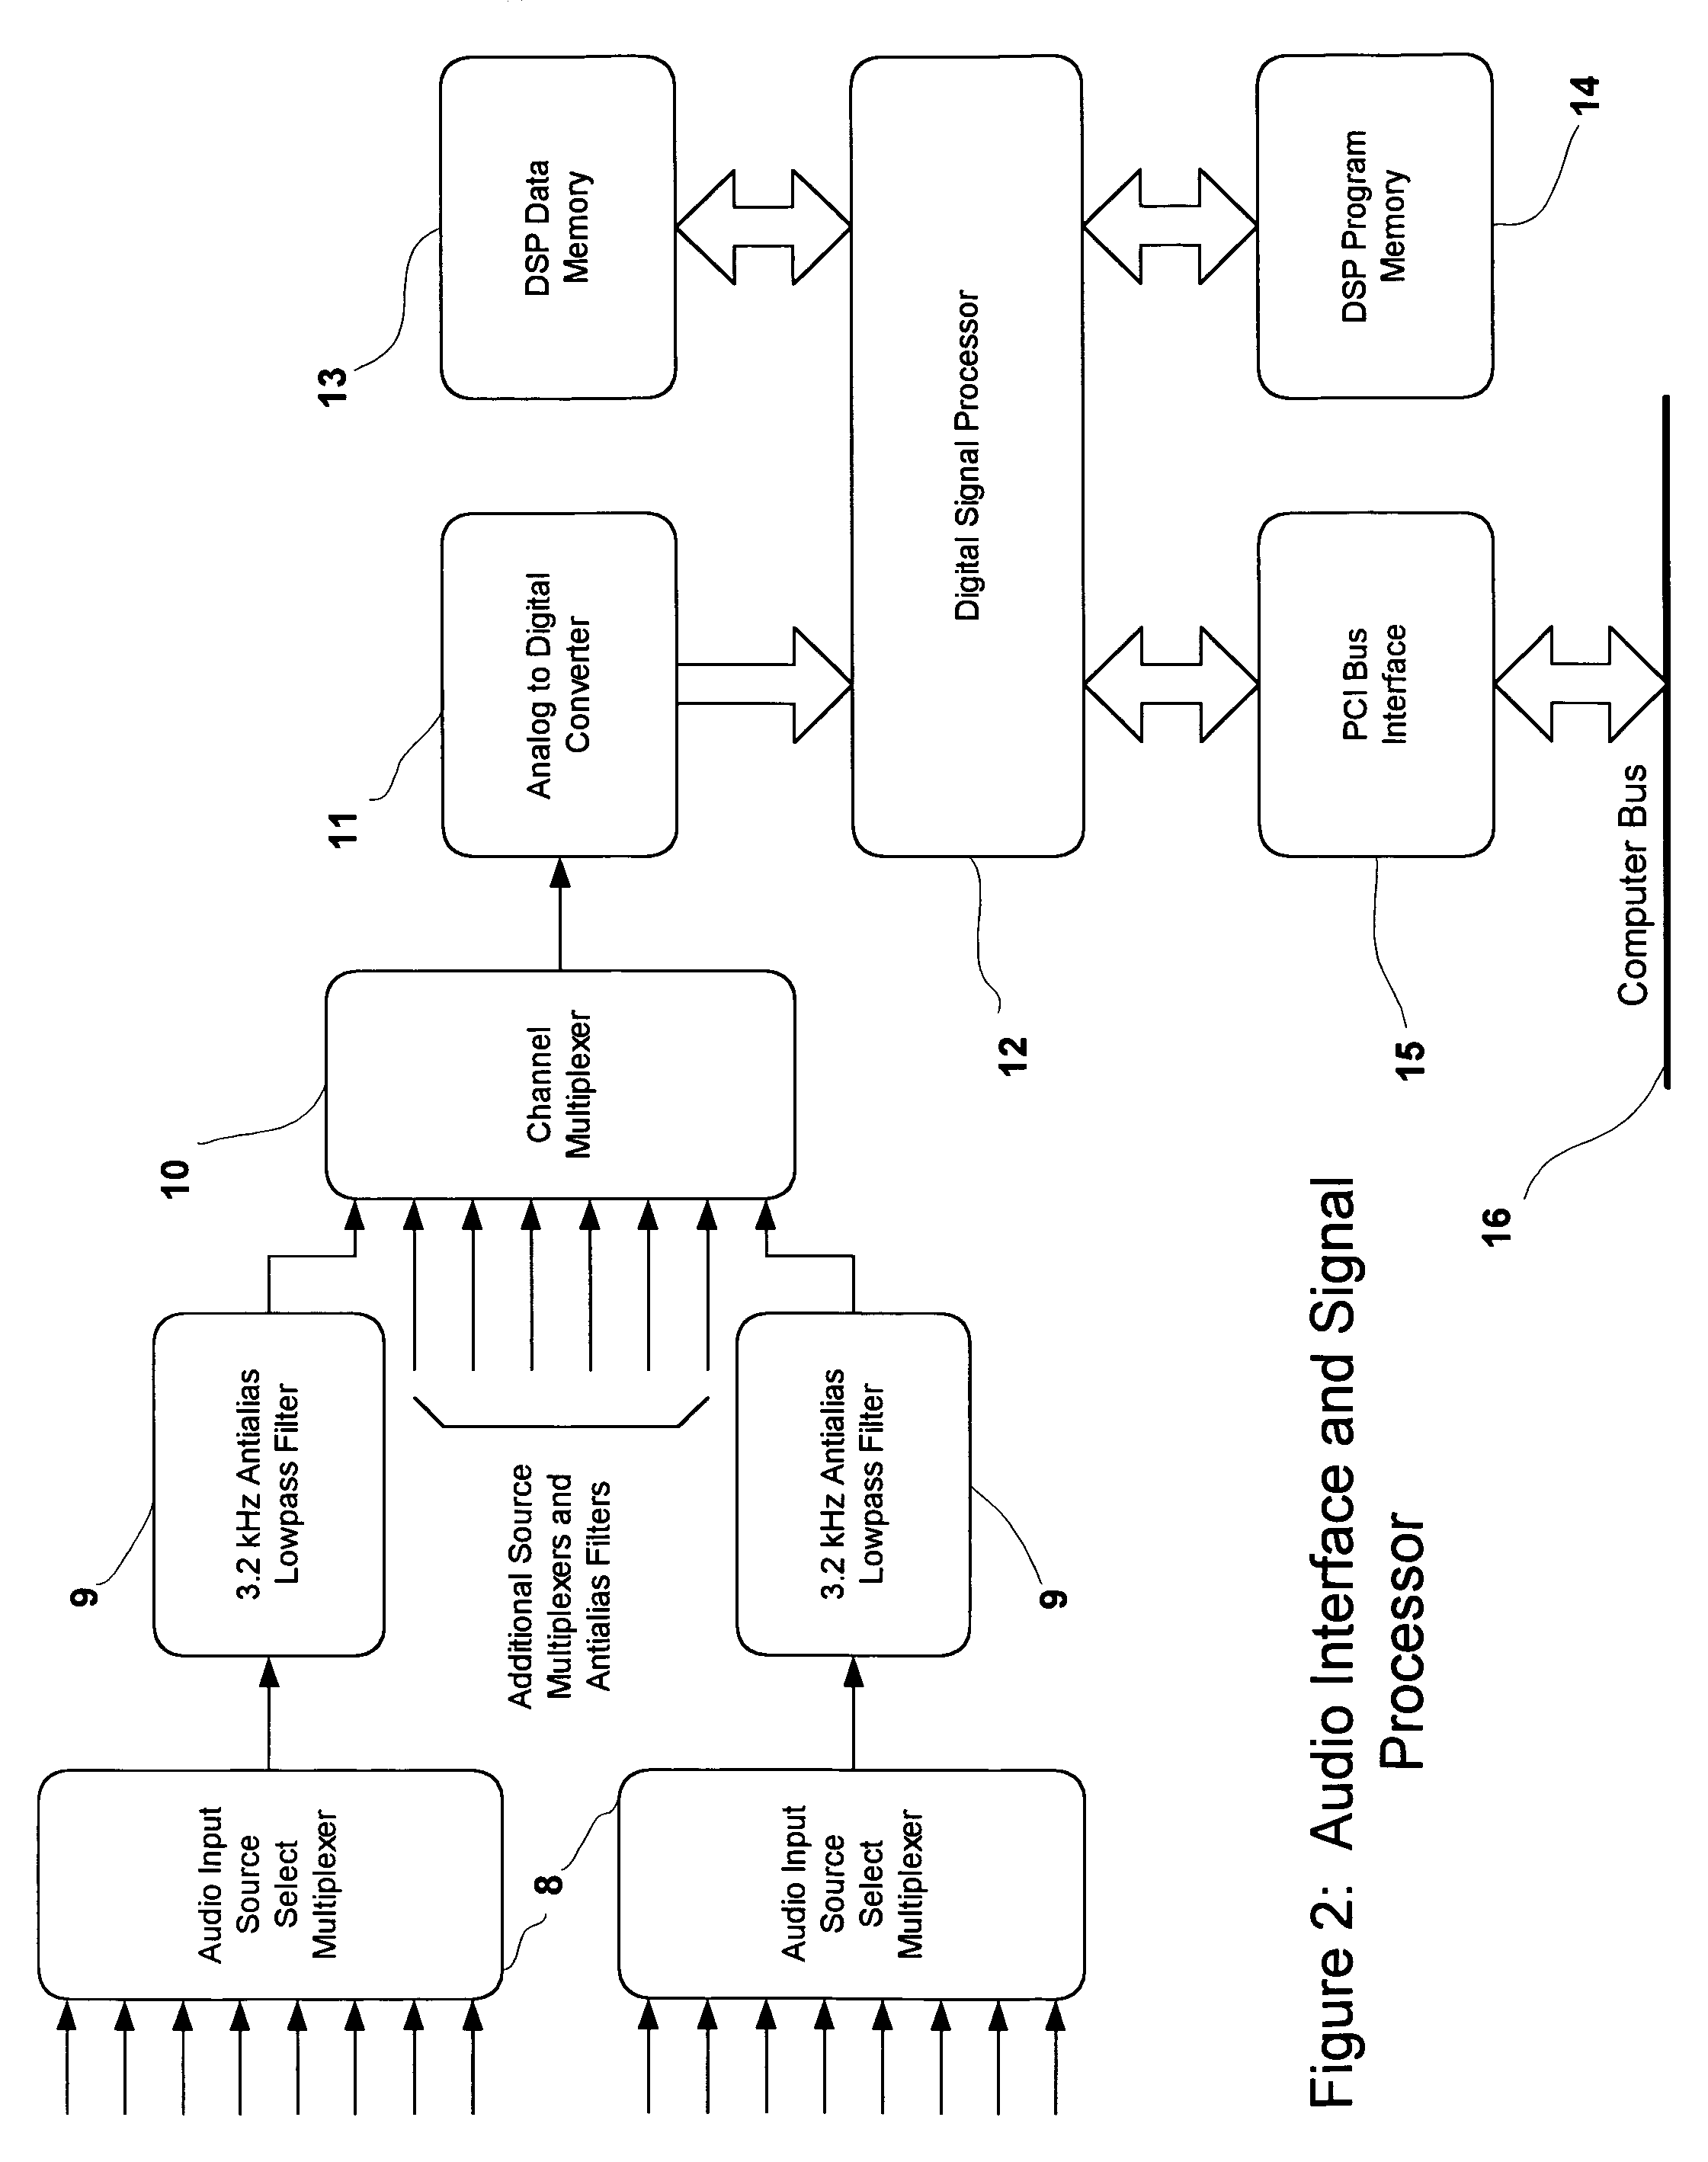 Method and apparatus for automatically recognizing input audio and/or video streams